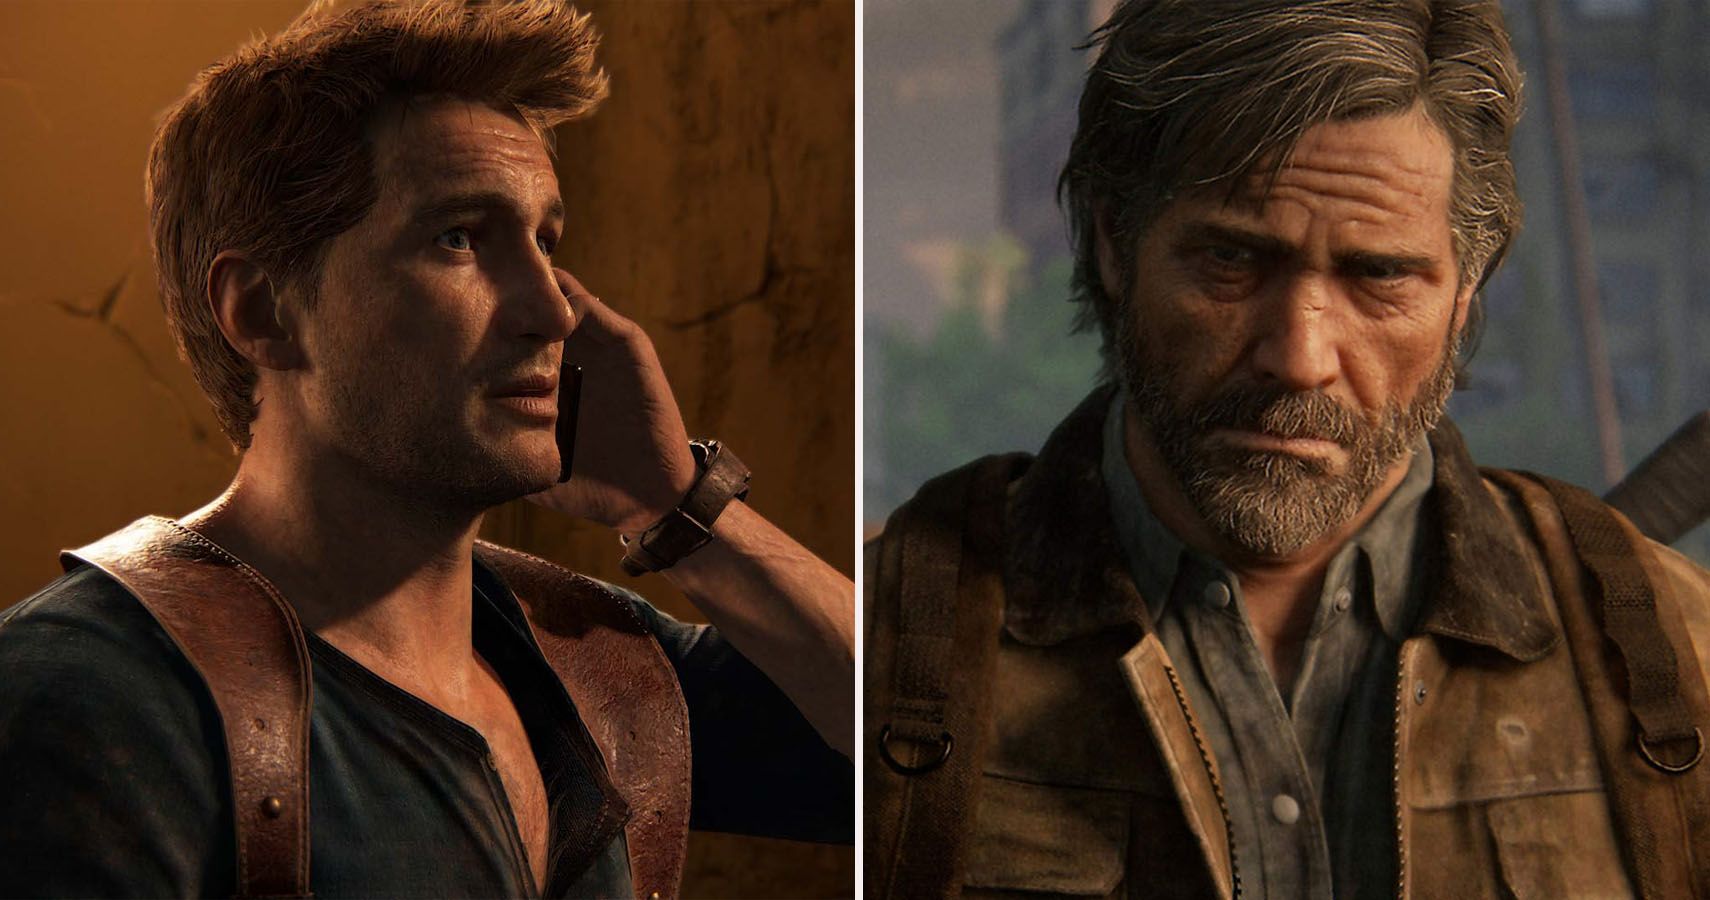 Uncharted 4' shows what its devs learned from 'The Last of Us